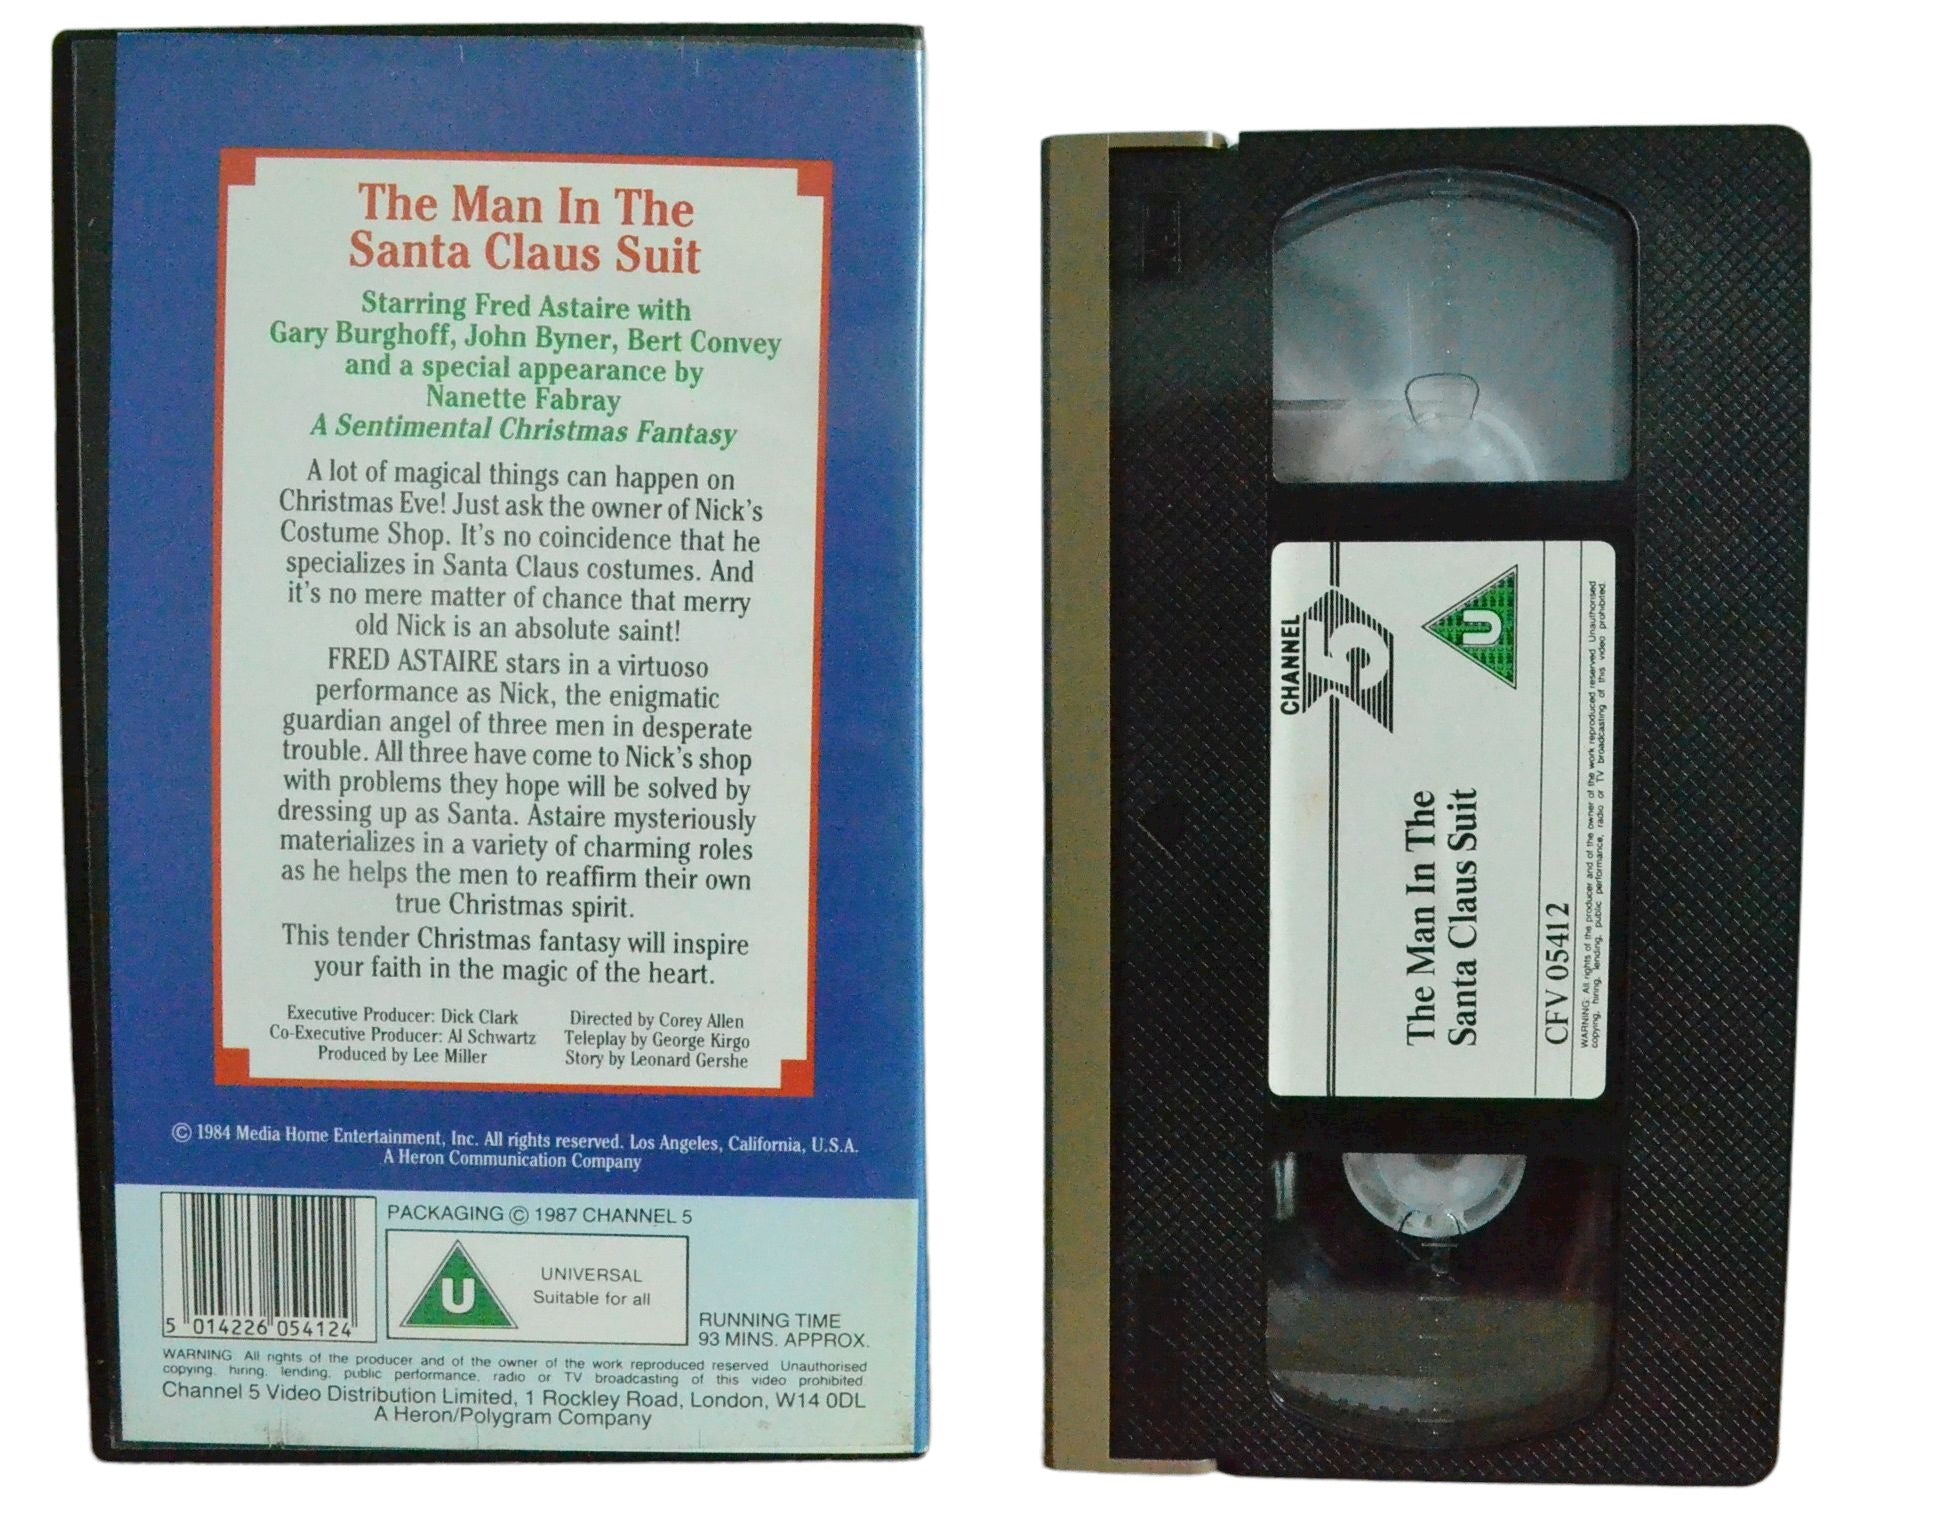 The Man In The Santa Claus Suit - Fred Astaire - Channel 5 - Childrens - Pal VHS-